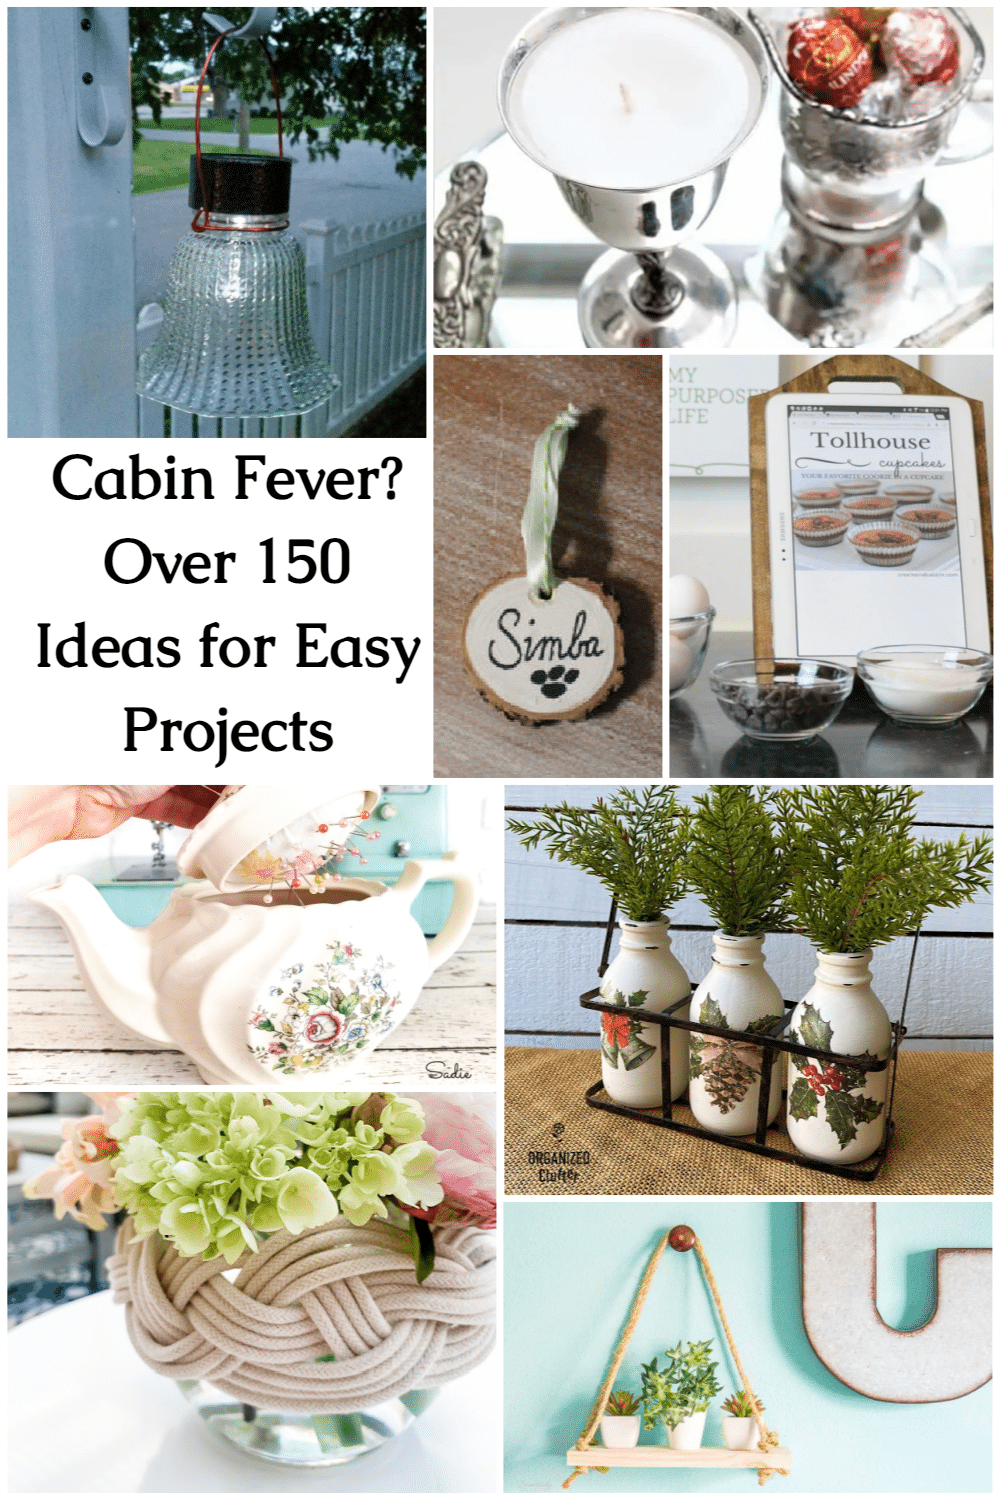 100 Easy Project Ideas for when you're stuck in the house and bored to death. Is it too hot? Too cold? Do you need a creative outlet, but are in a rut? Easy and quick projects to get your mojo back. #MyRepurposedLife #diy #easy #projects #indoors via @repurposedlife